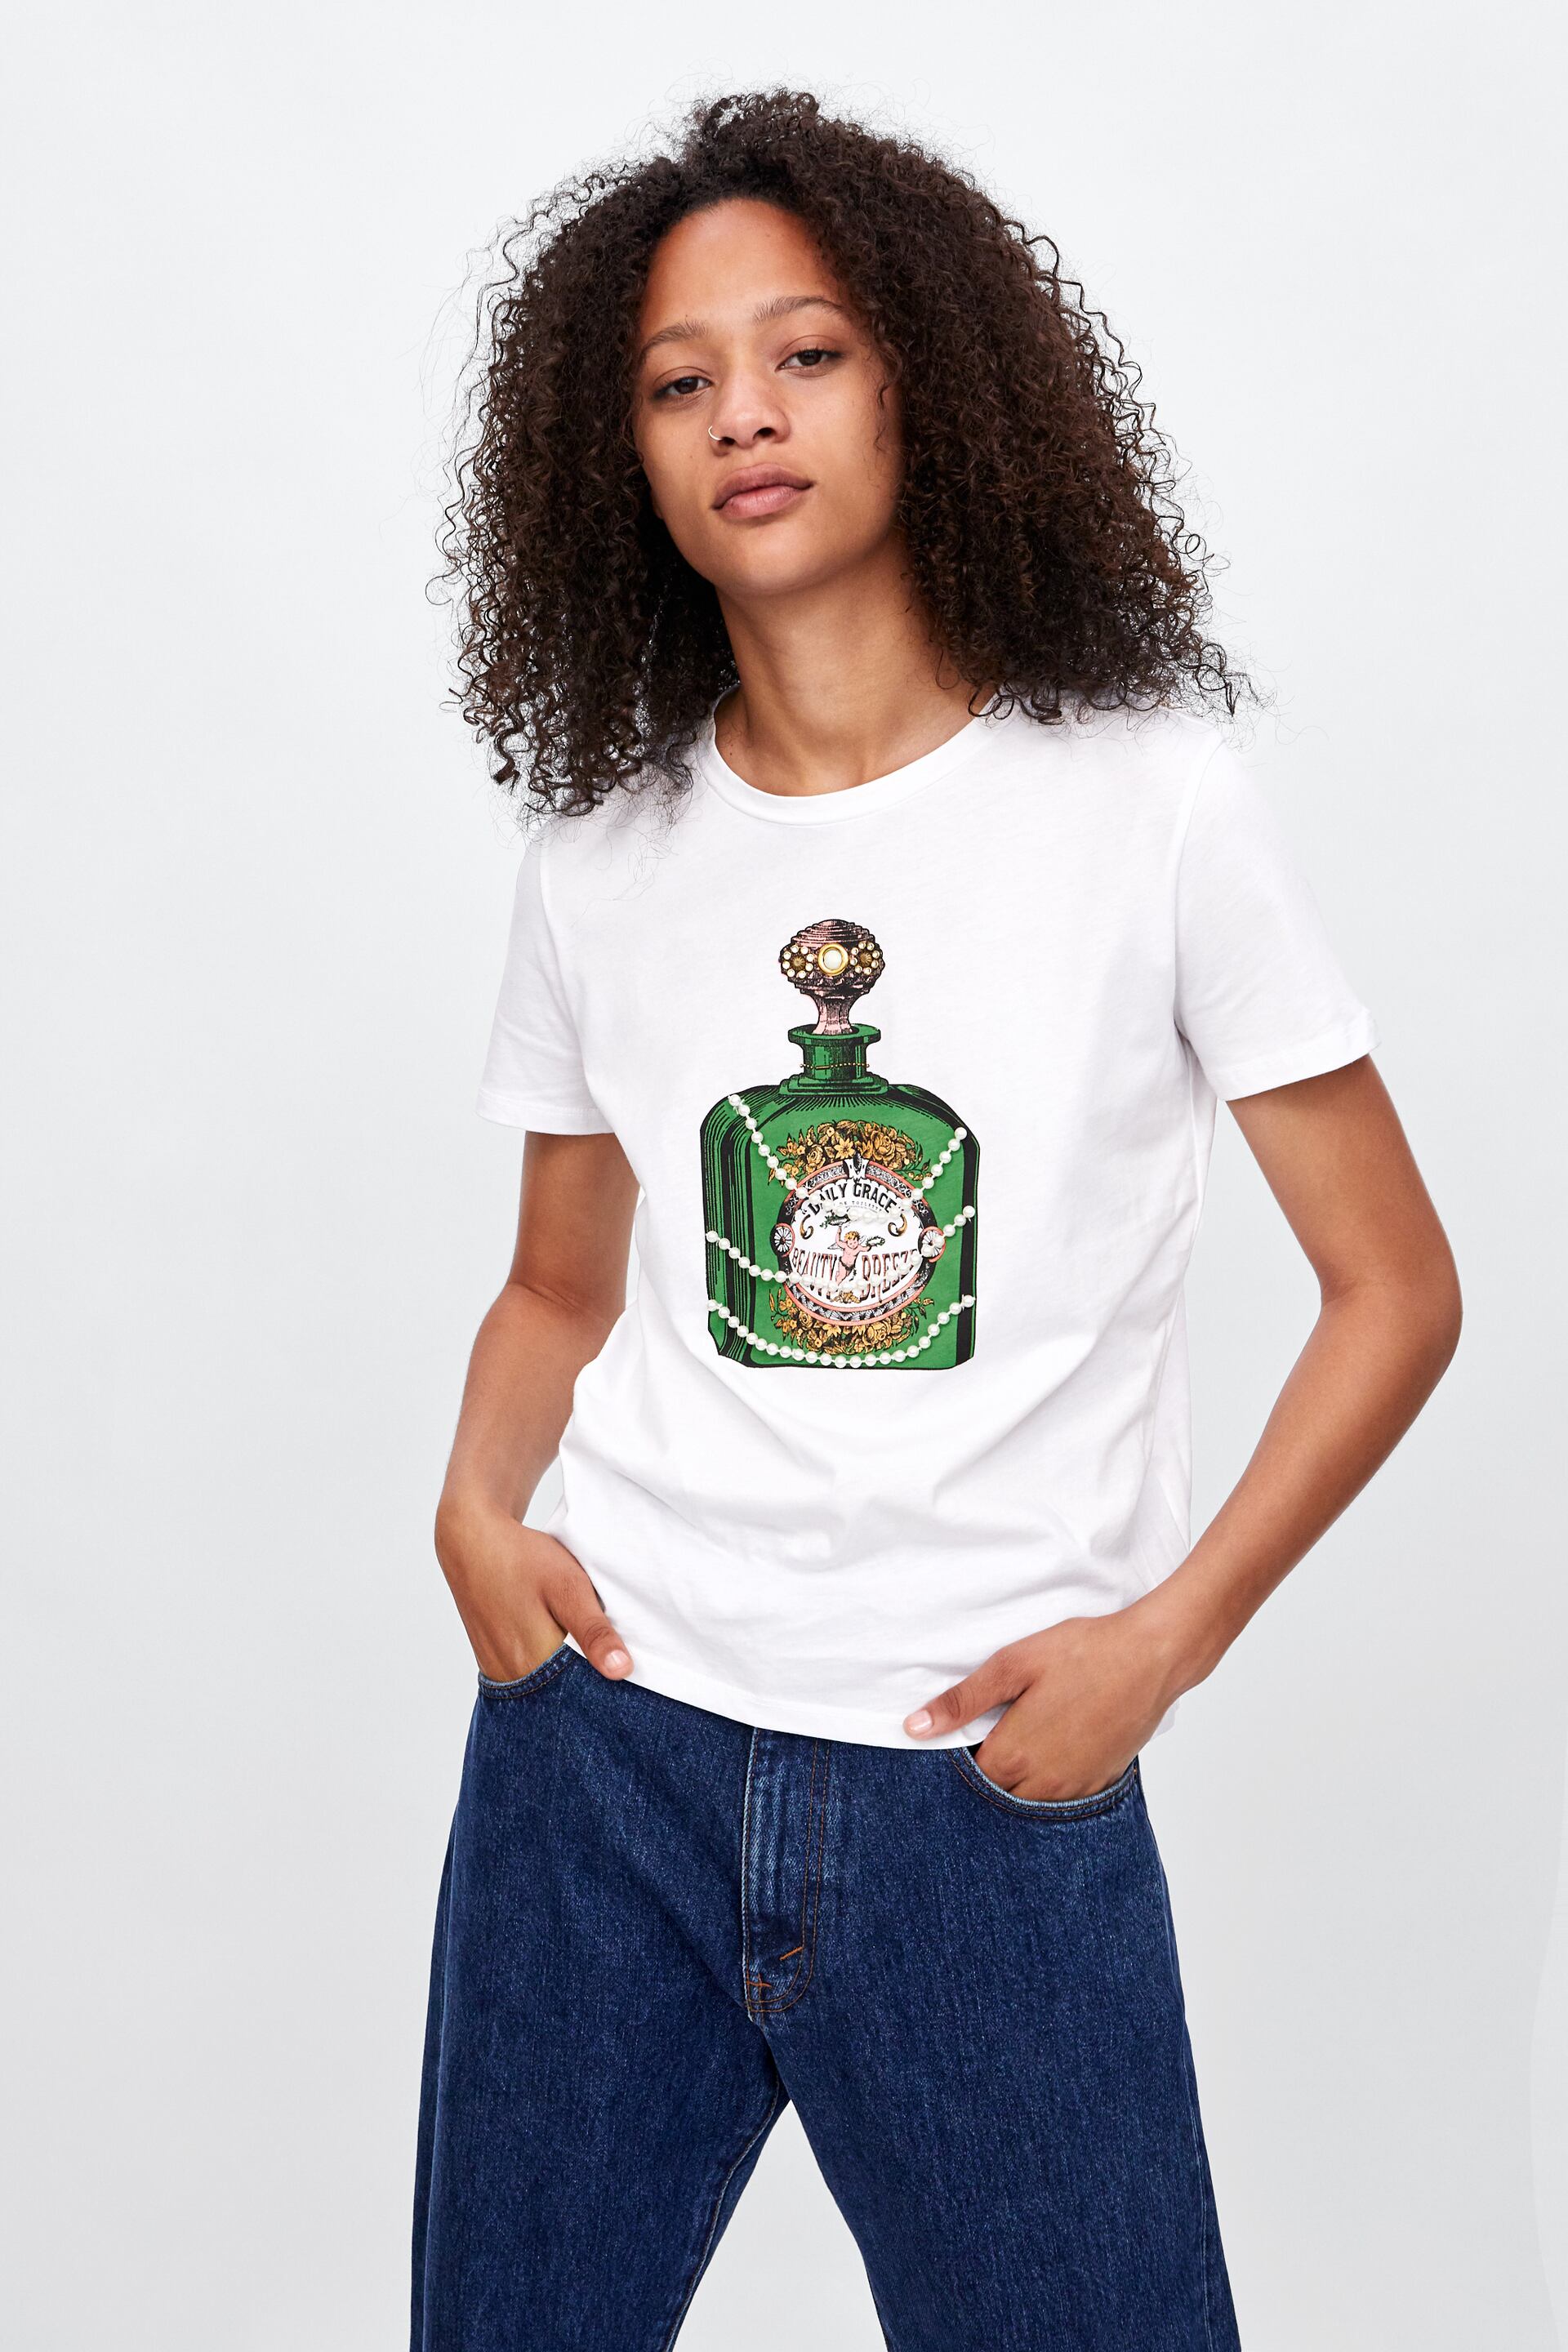 Zara T-SHIRT WITH JEWEL PRINT at £15.99 | love the brands